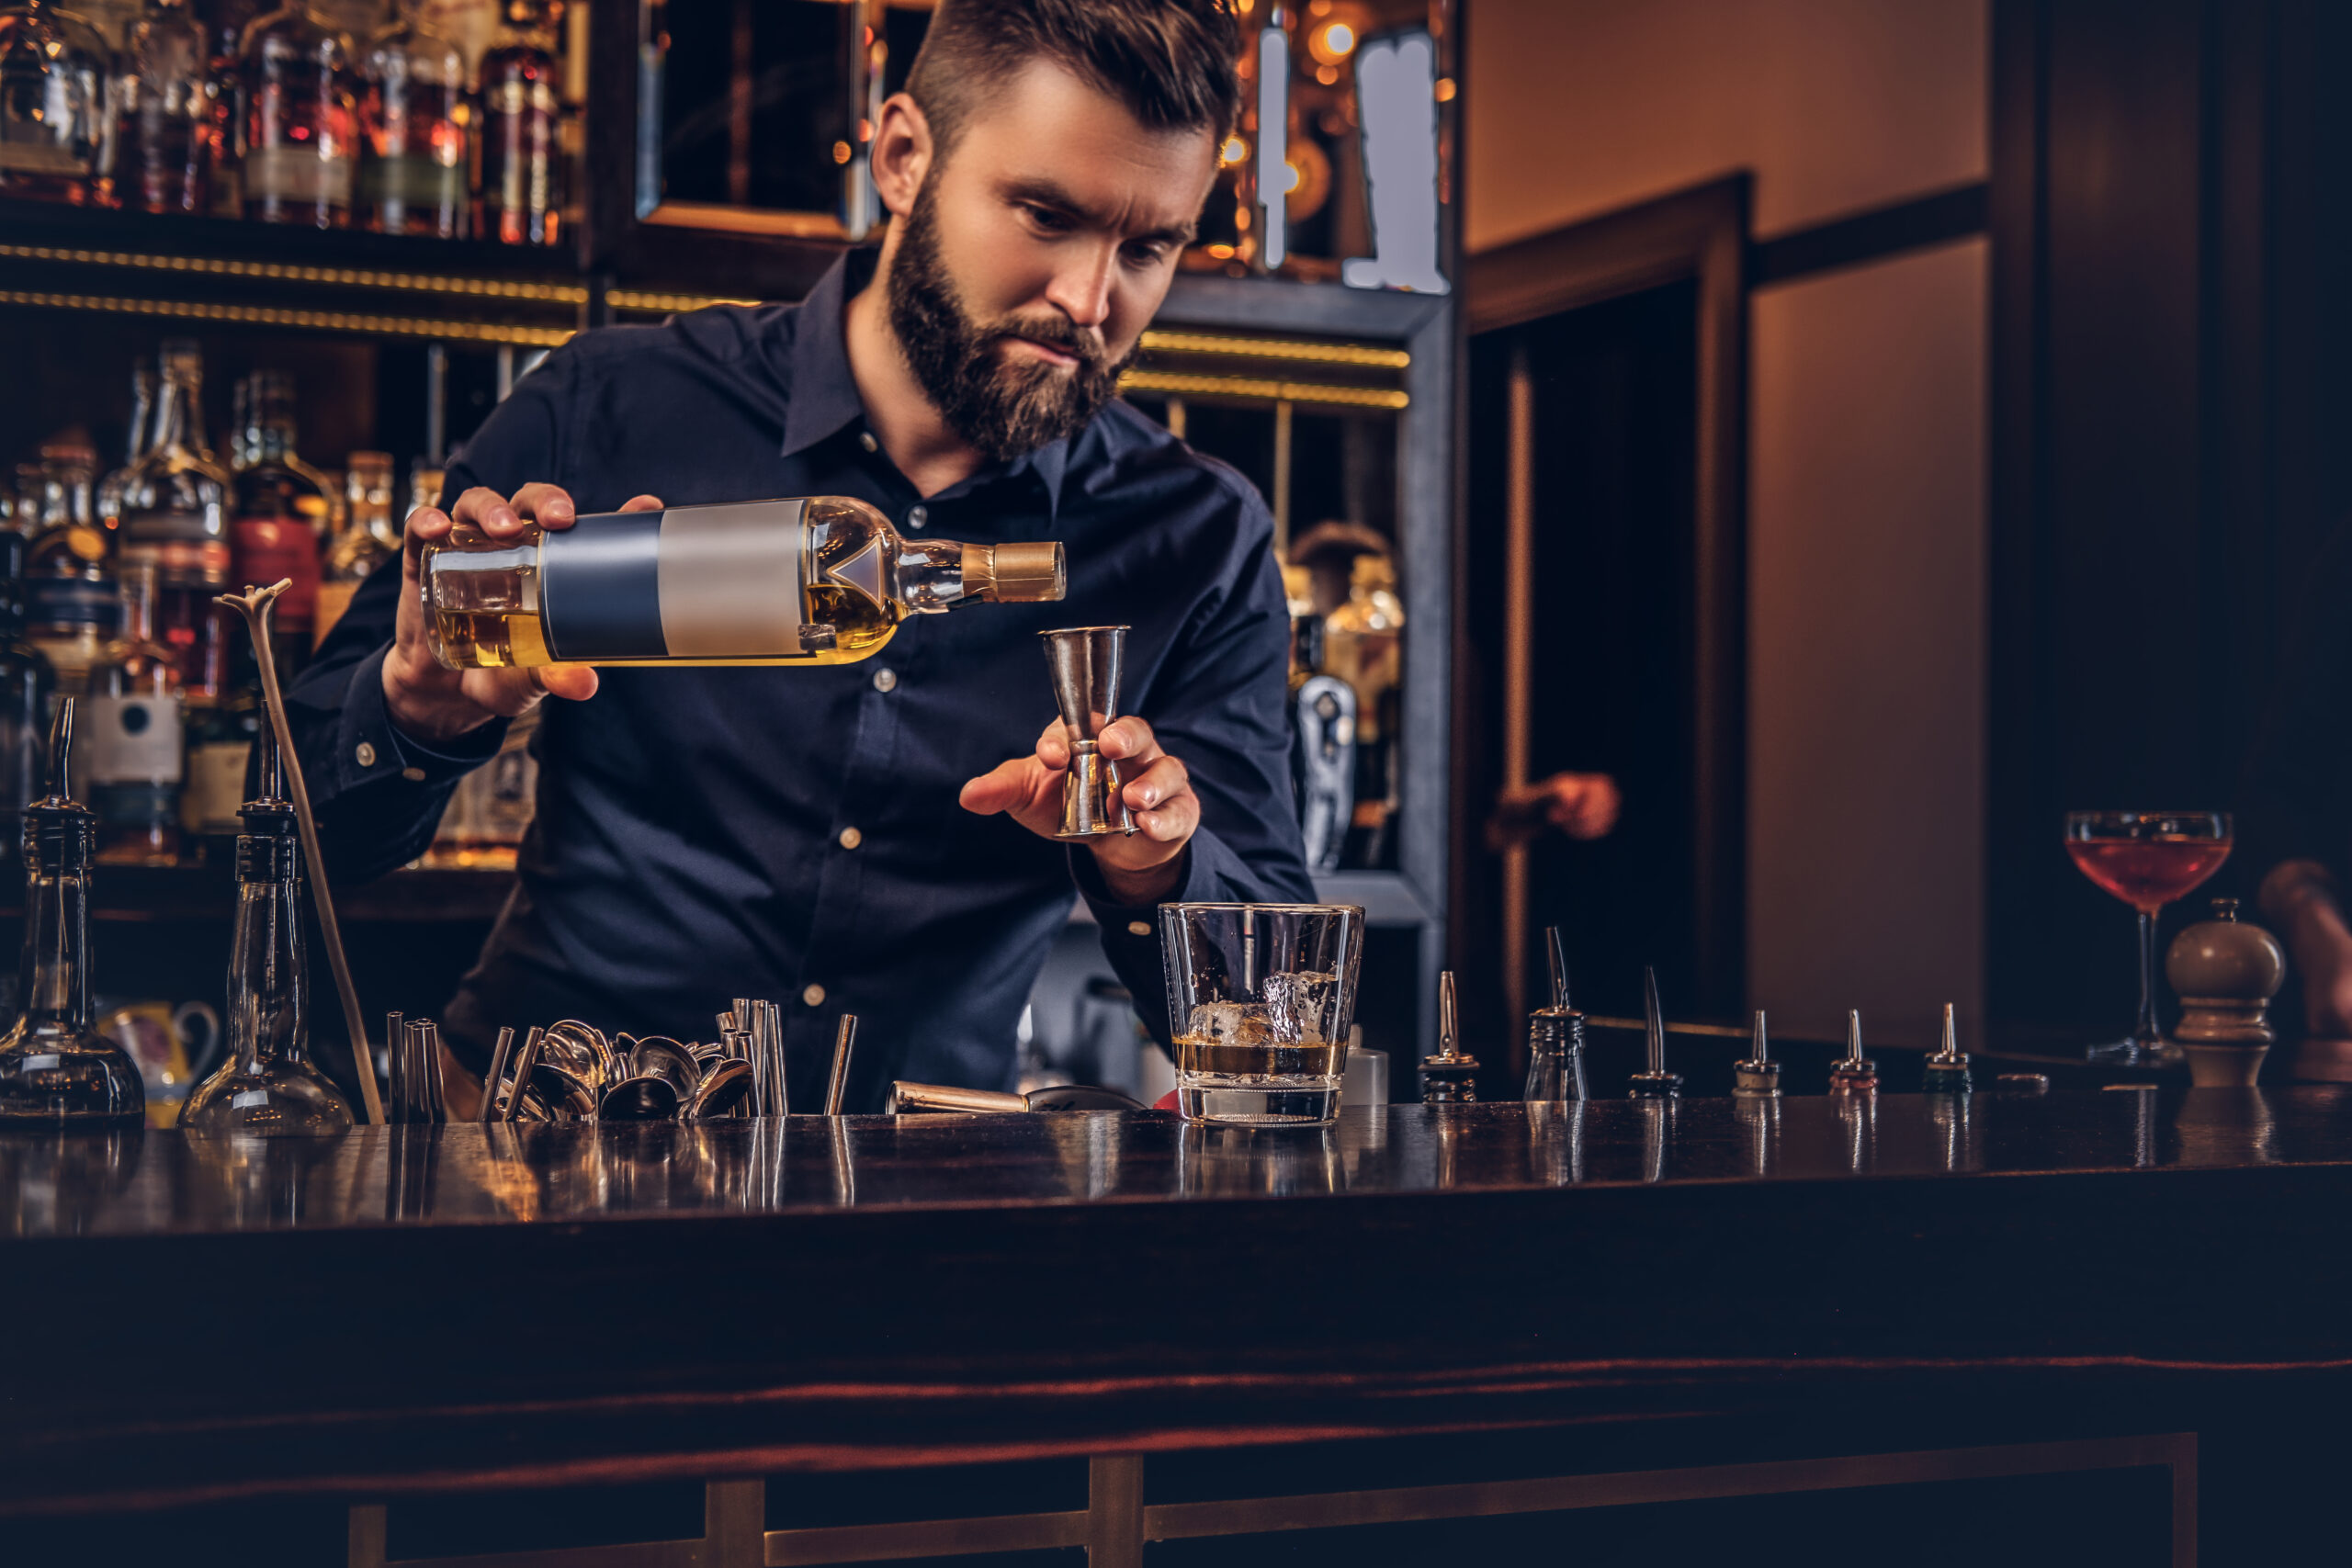 Stylish brutal bartender in a black shirt makes a cocktail at bar counter background.